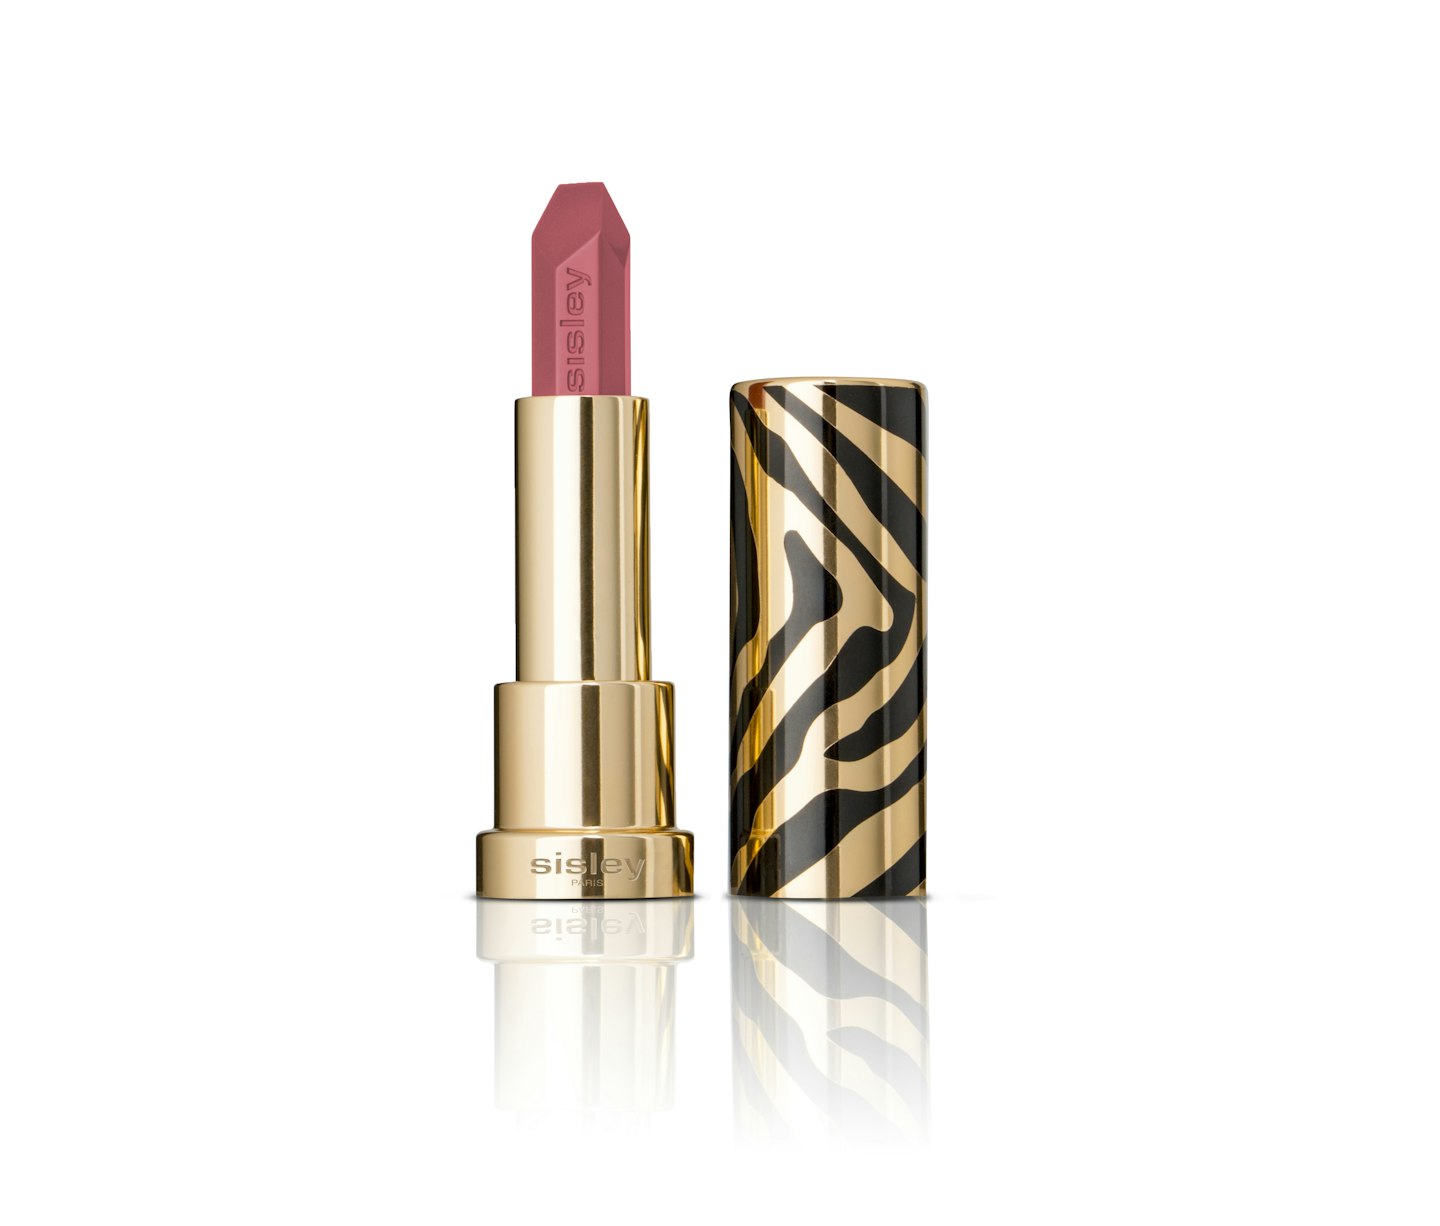 Sisley Le Phyto Rouge Lipstick in Rose Paris, £38